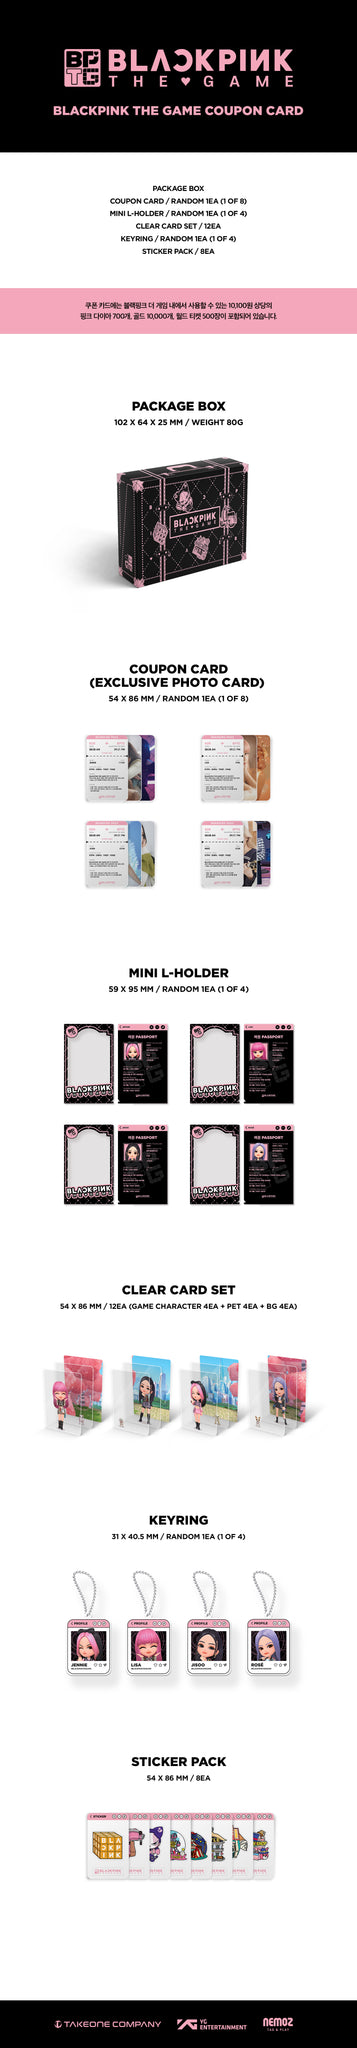 BLACKPINK THE GAME COUPON CARD